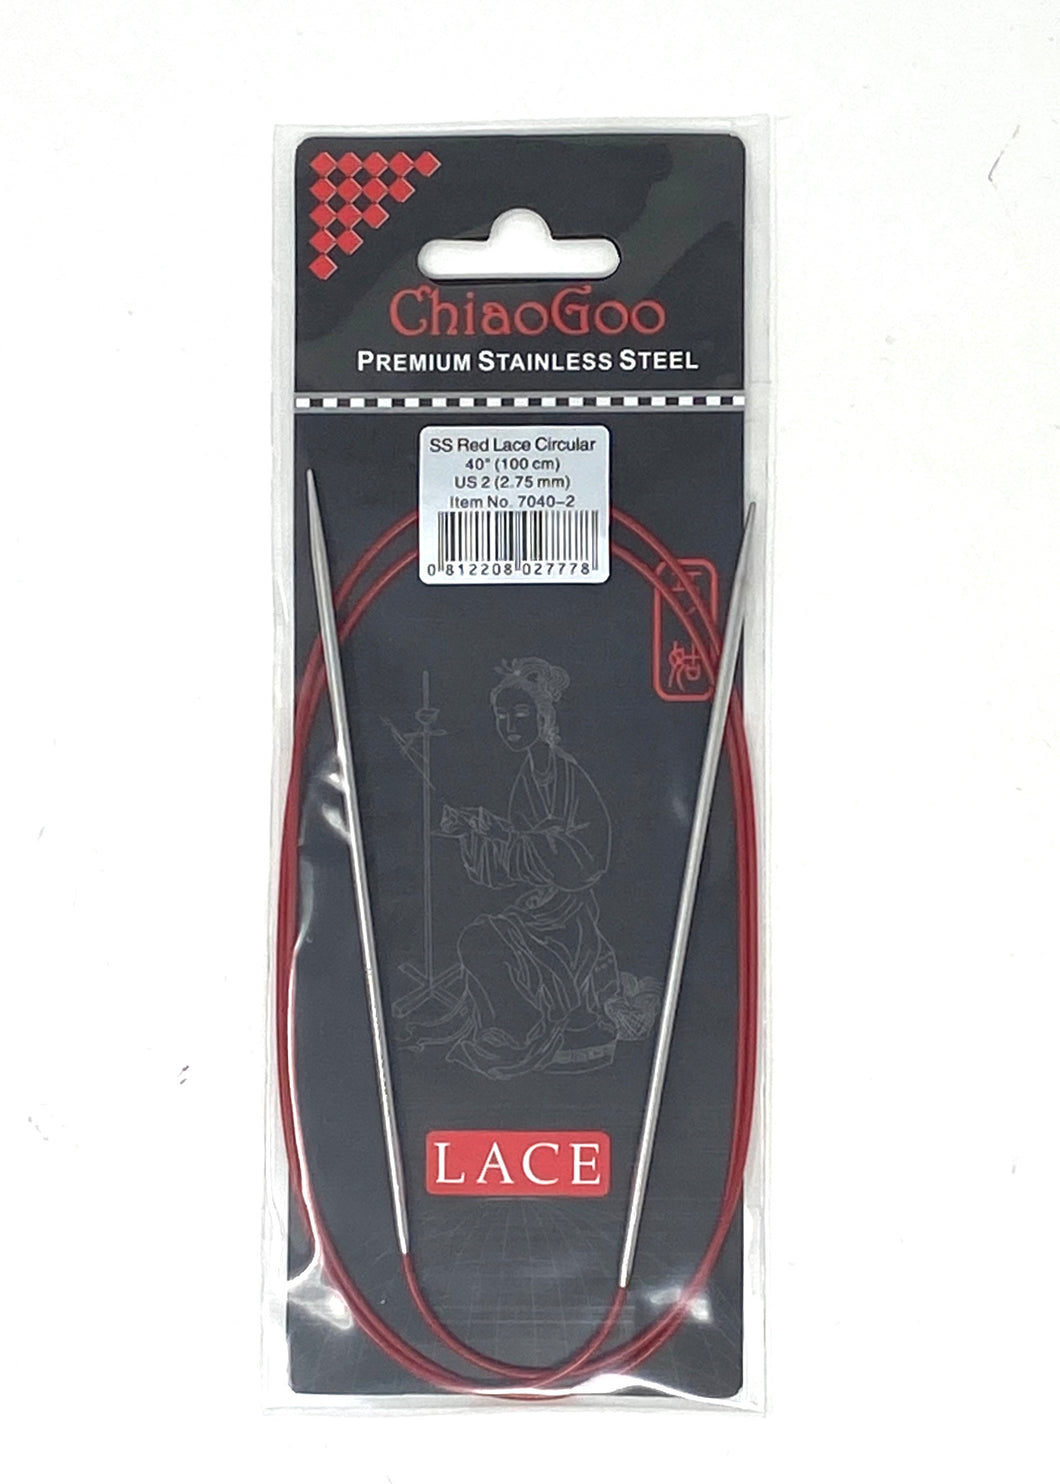 ChiaoGoo Red Lace Circular Needles - US 2 - 40 Inches